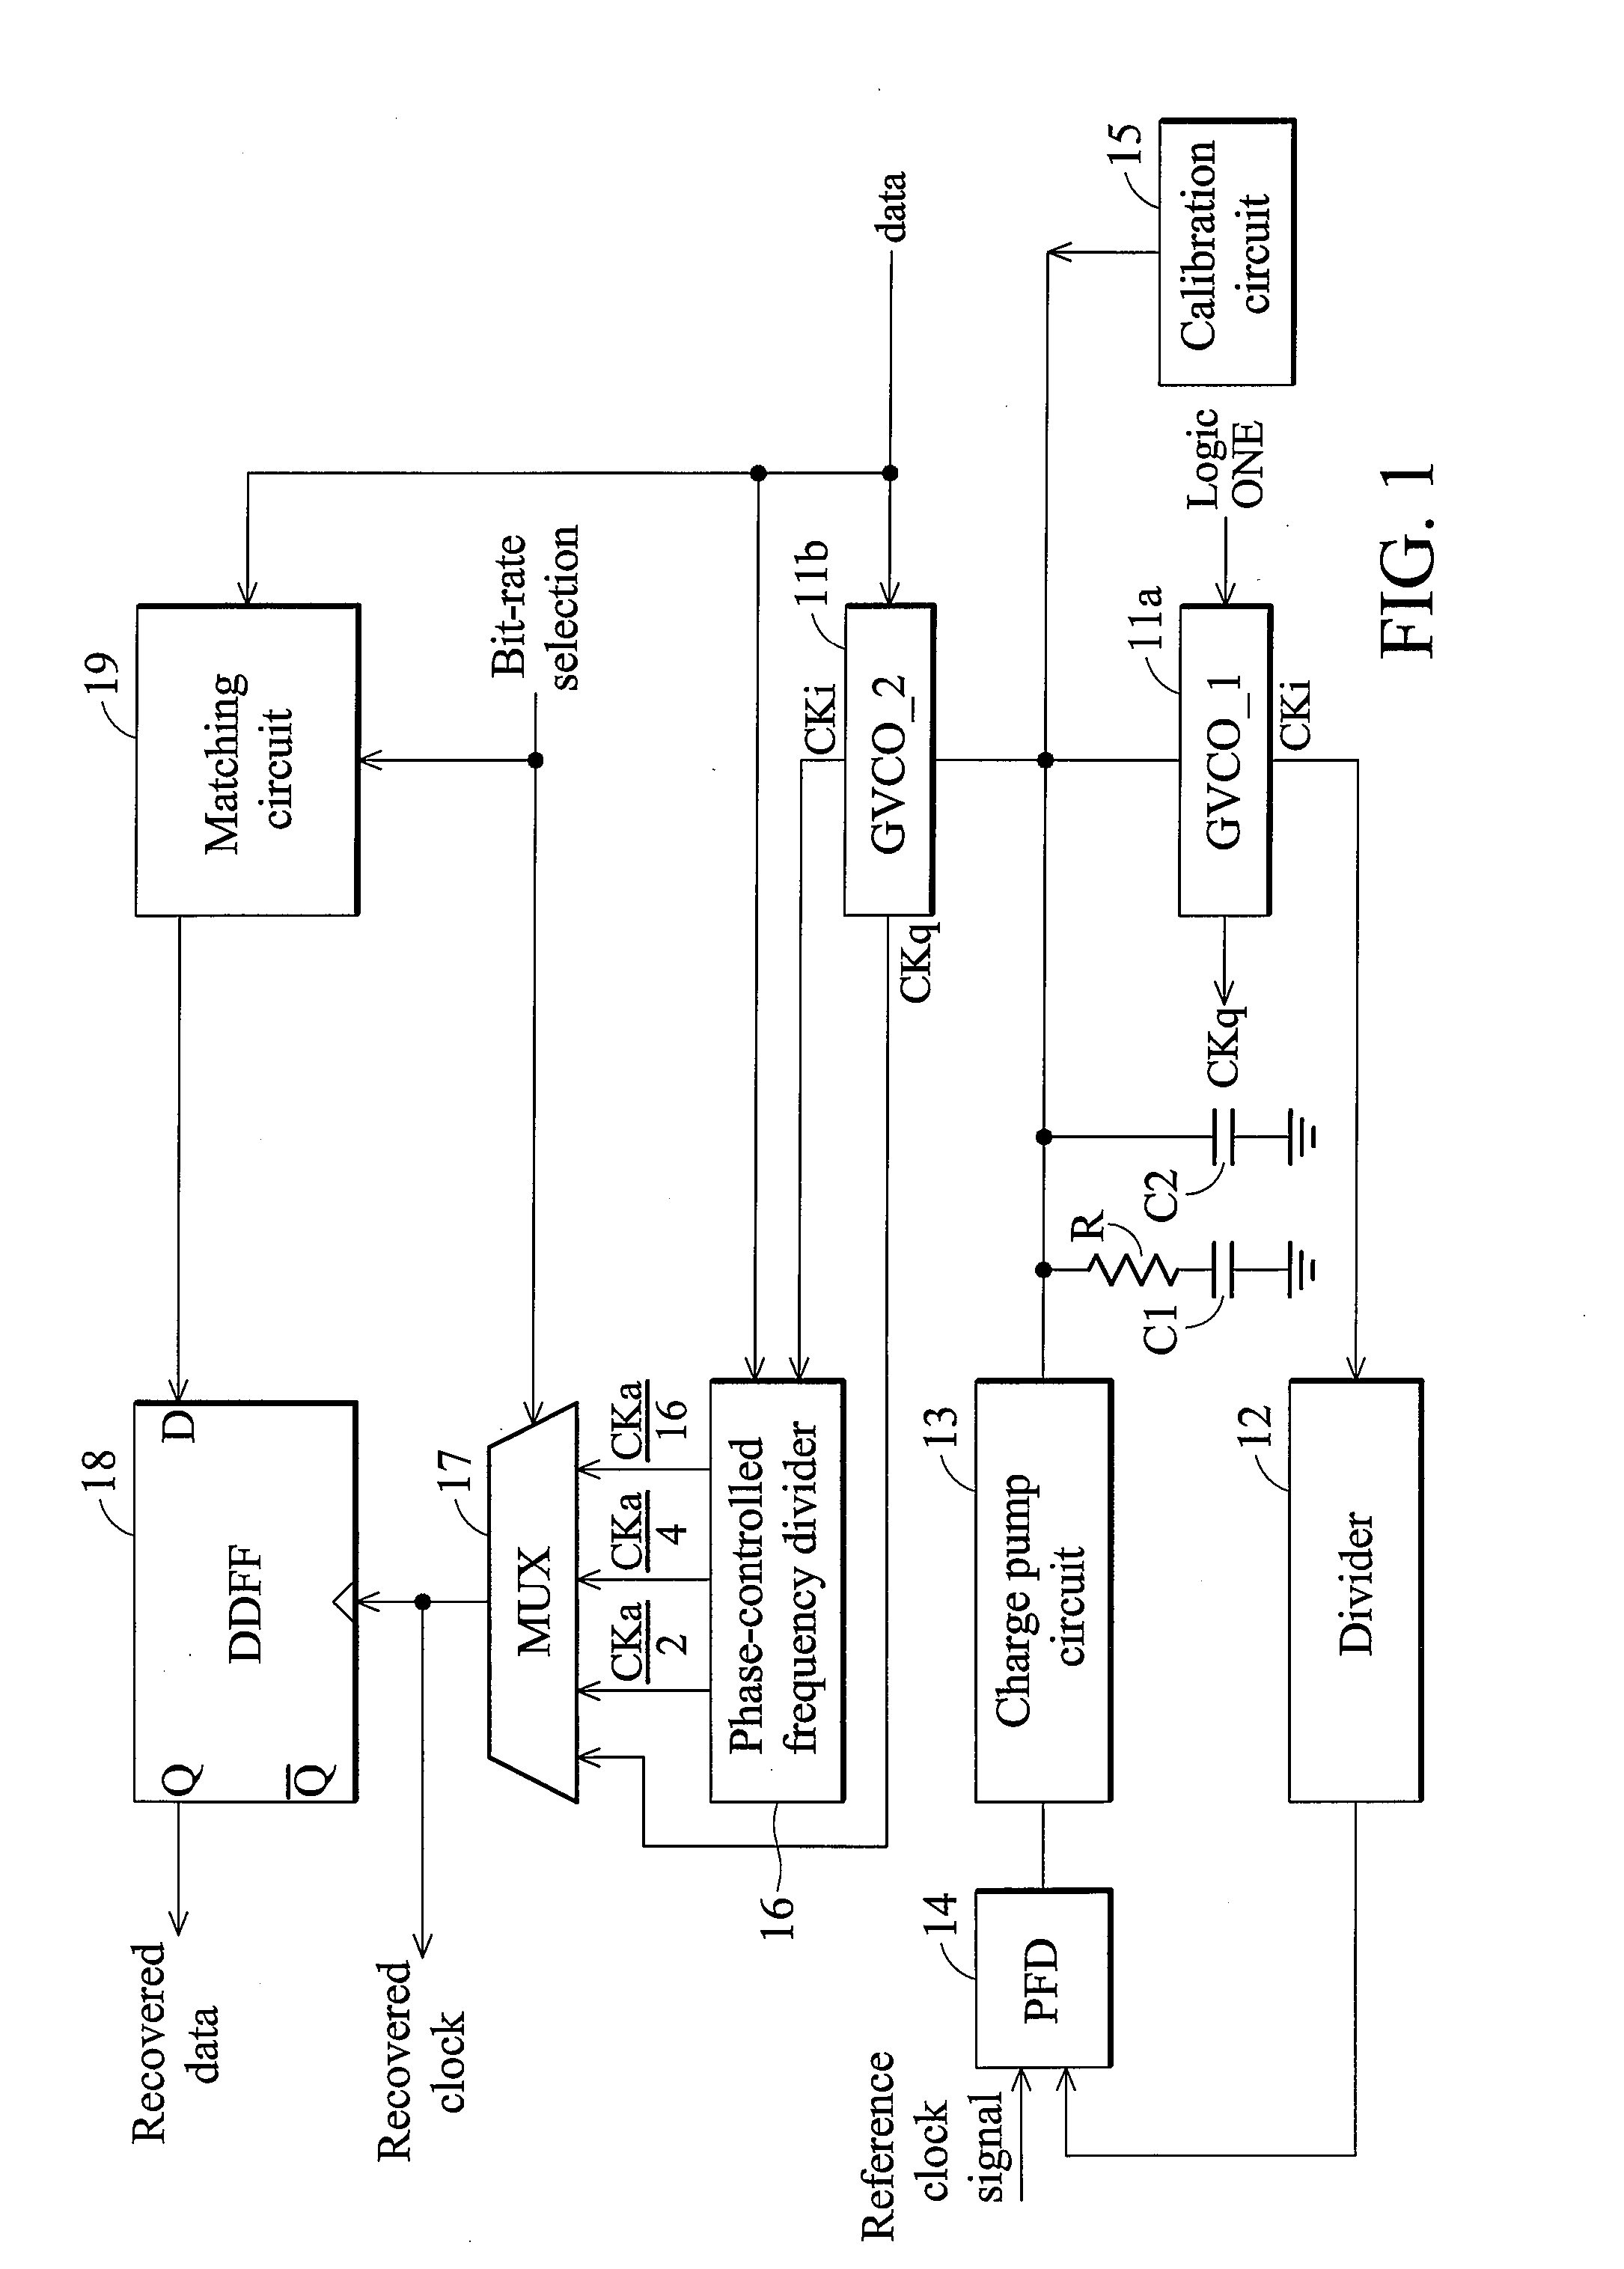 Multi-band burst-mode clock and data recovery circuit